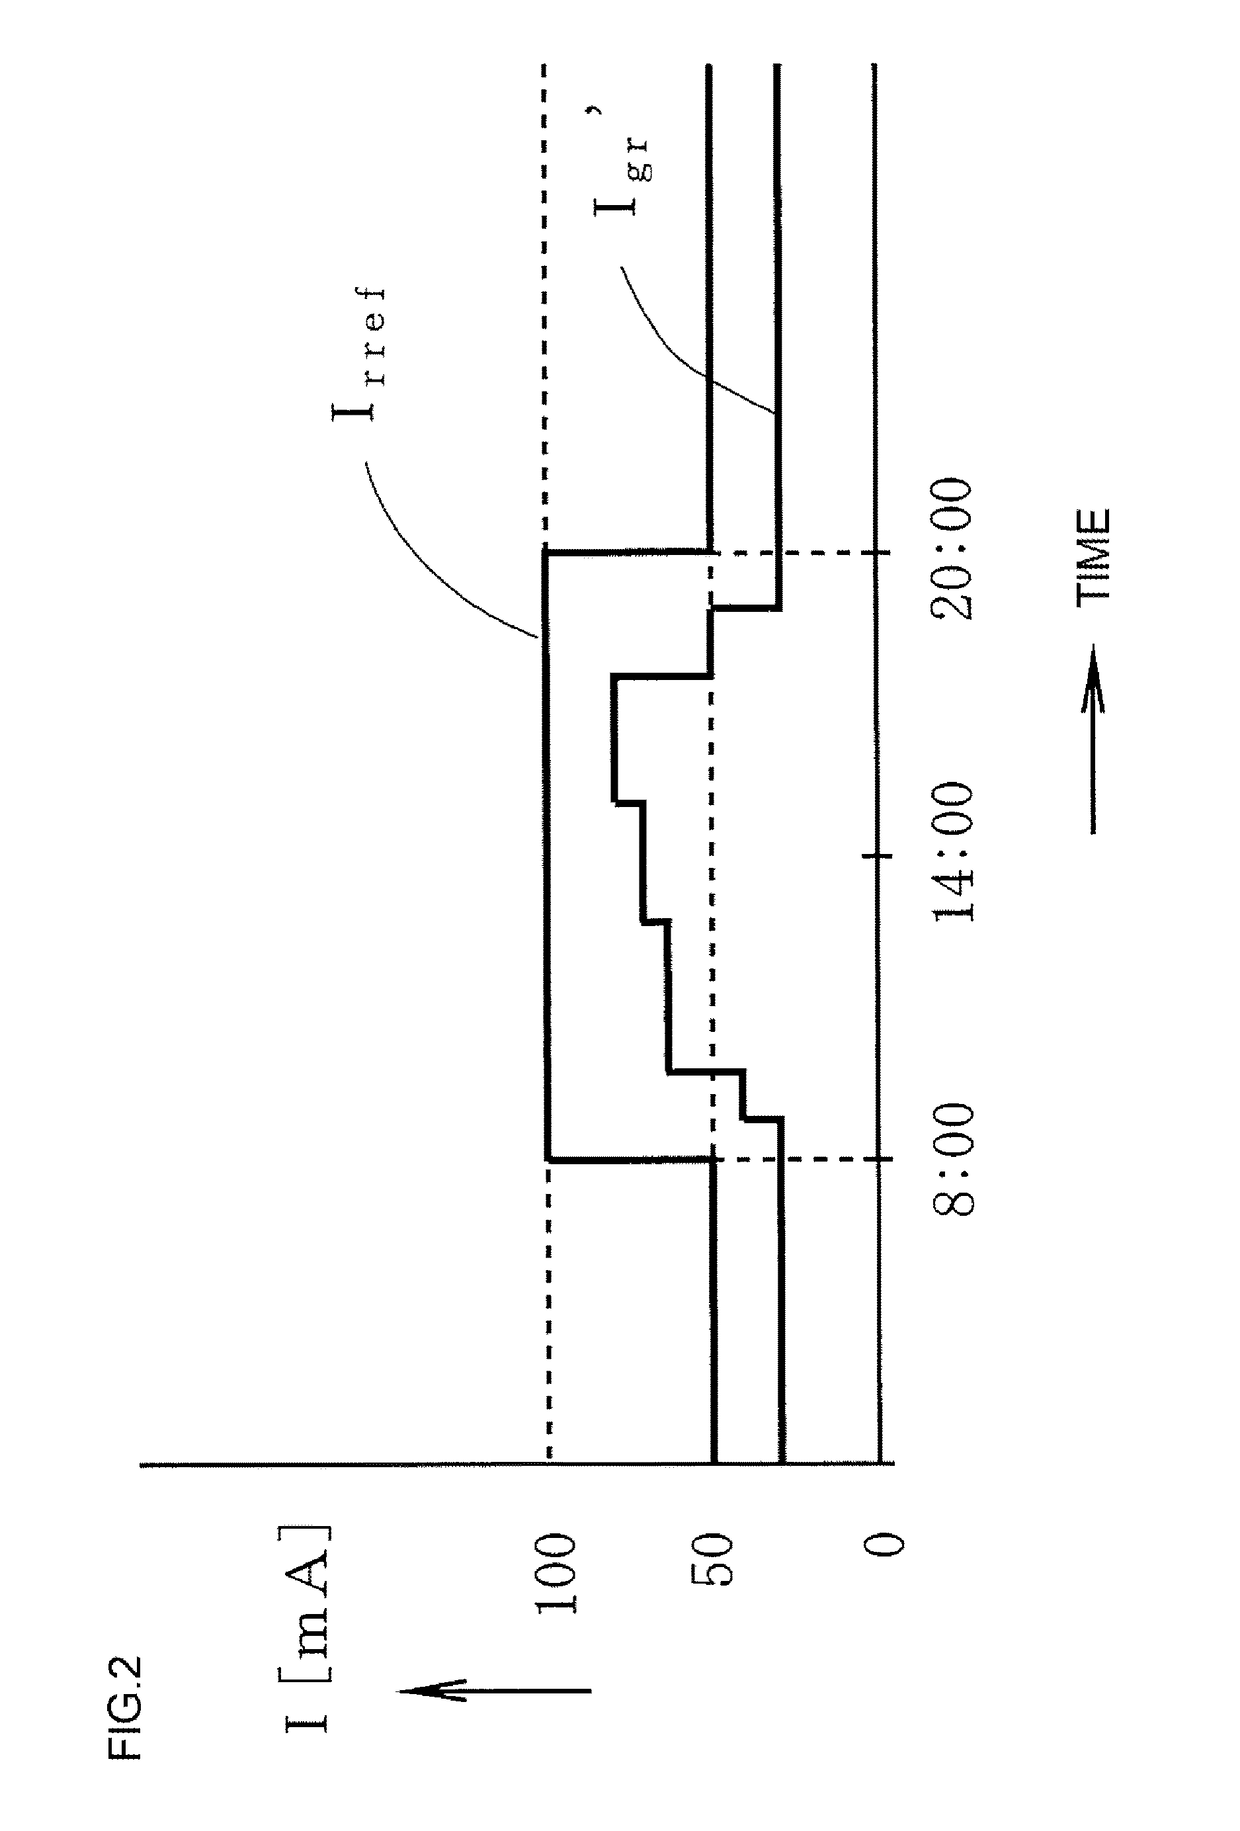 Insulation monitoring device